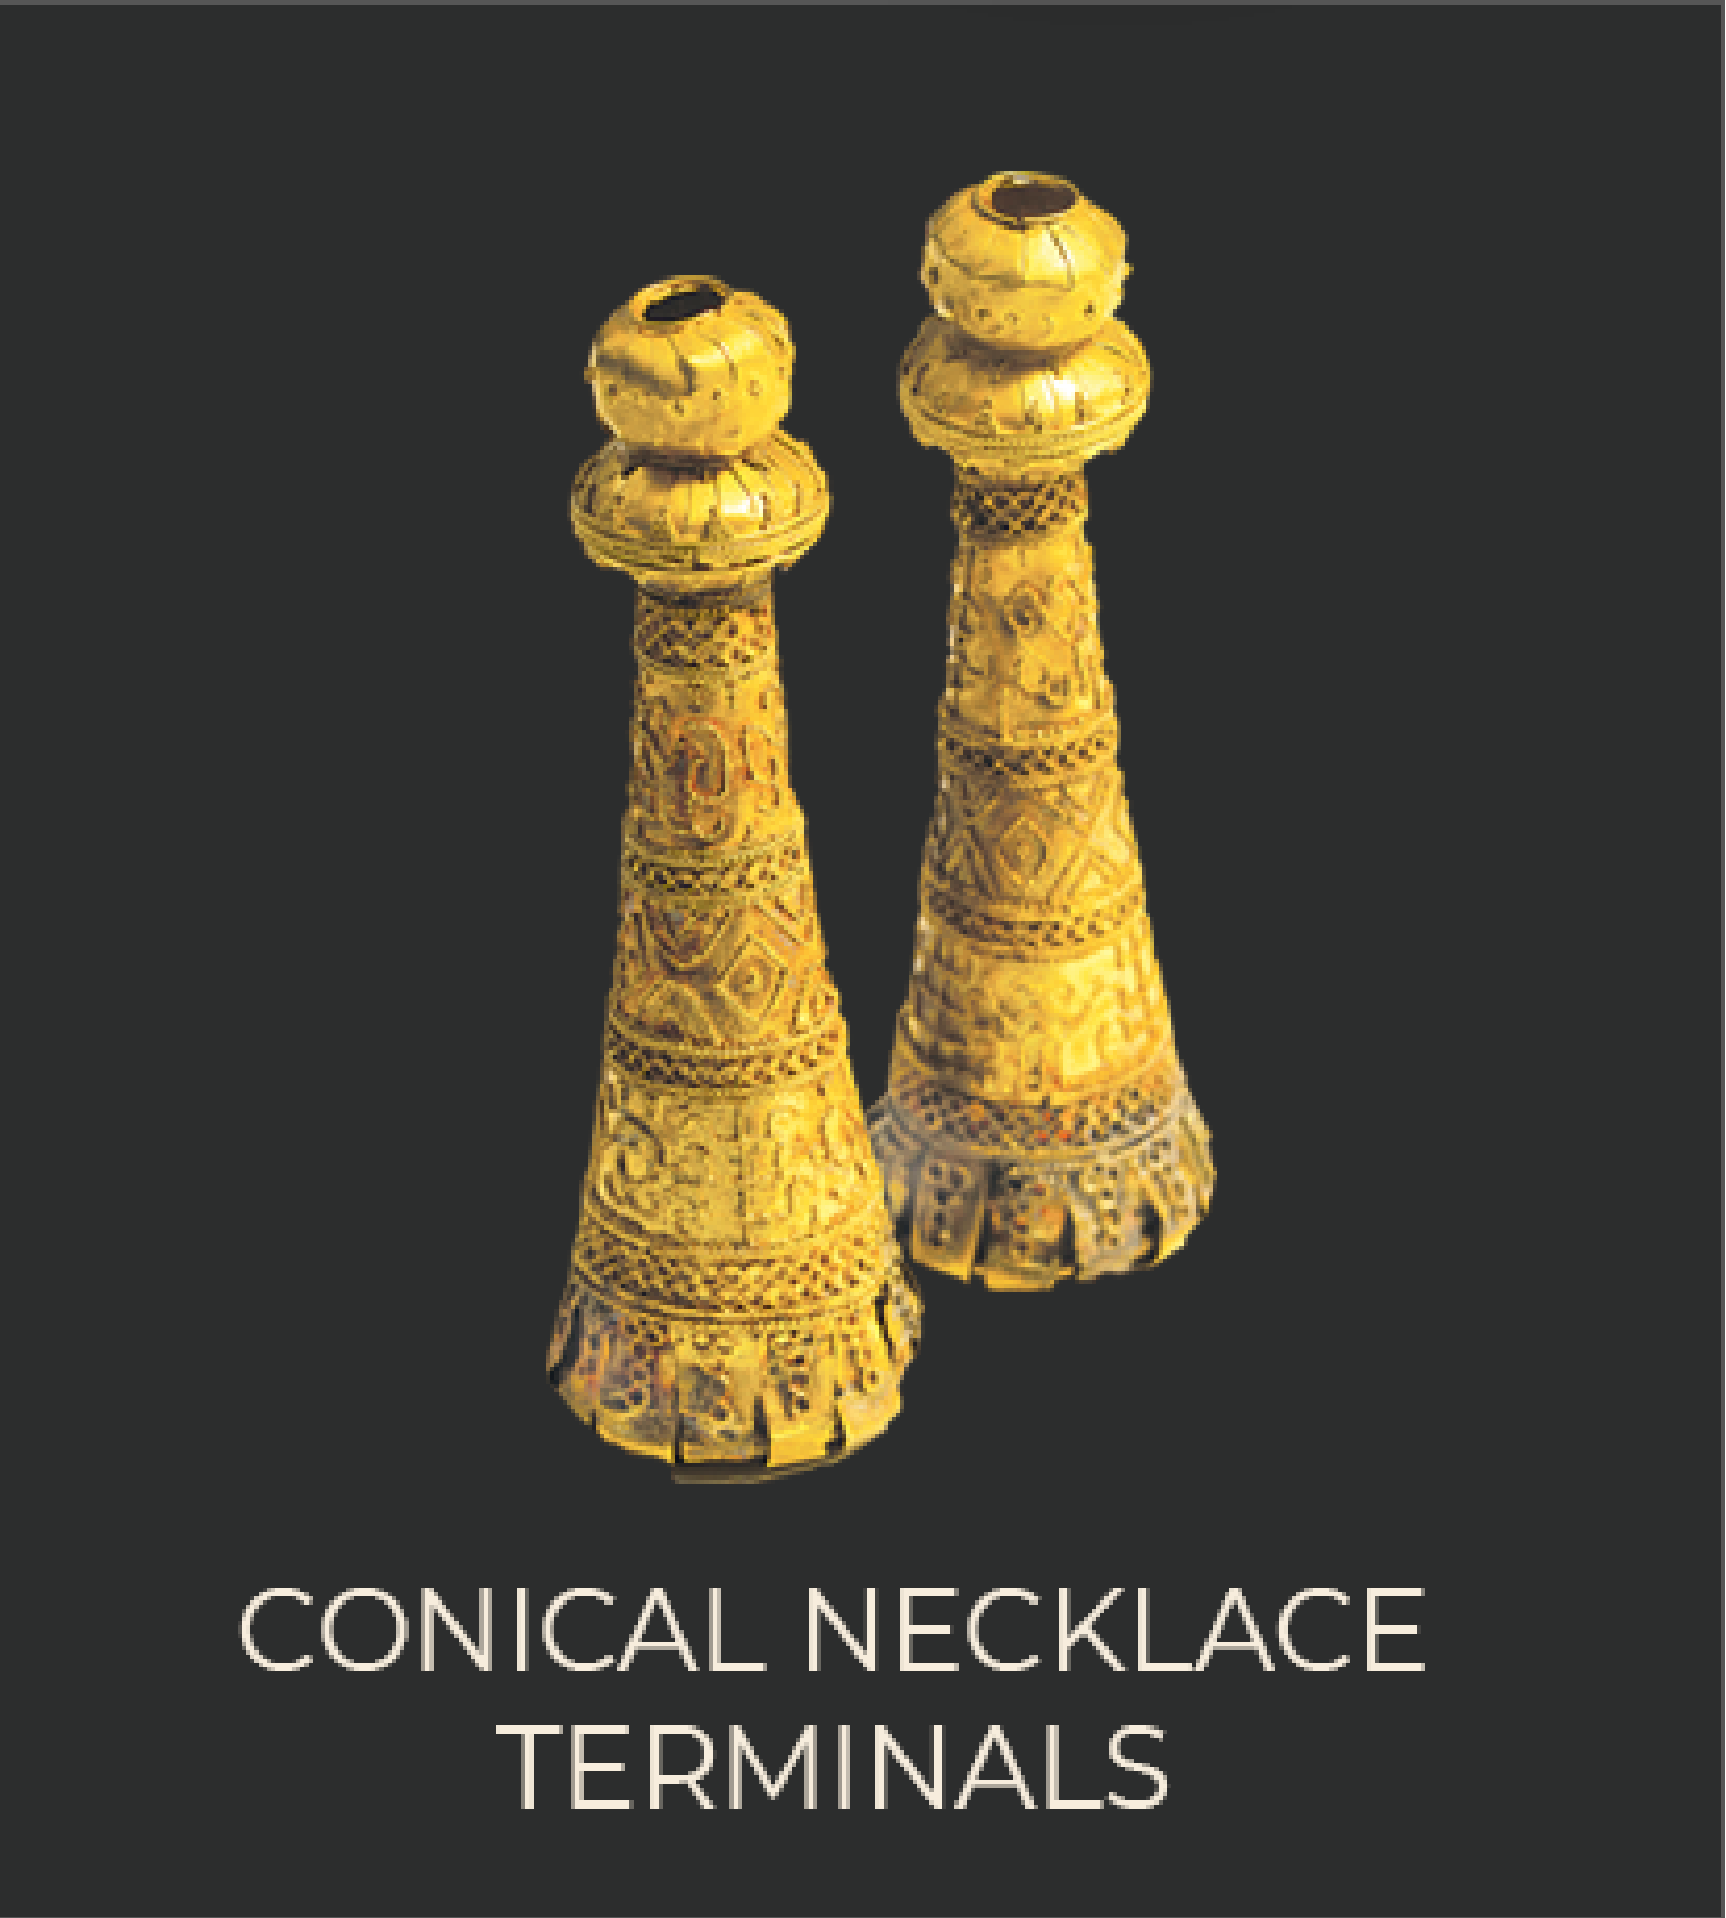 Conical Necklace Terminals